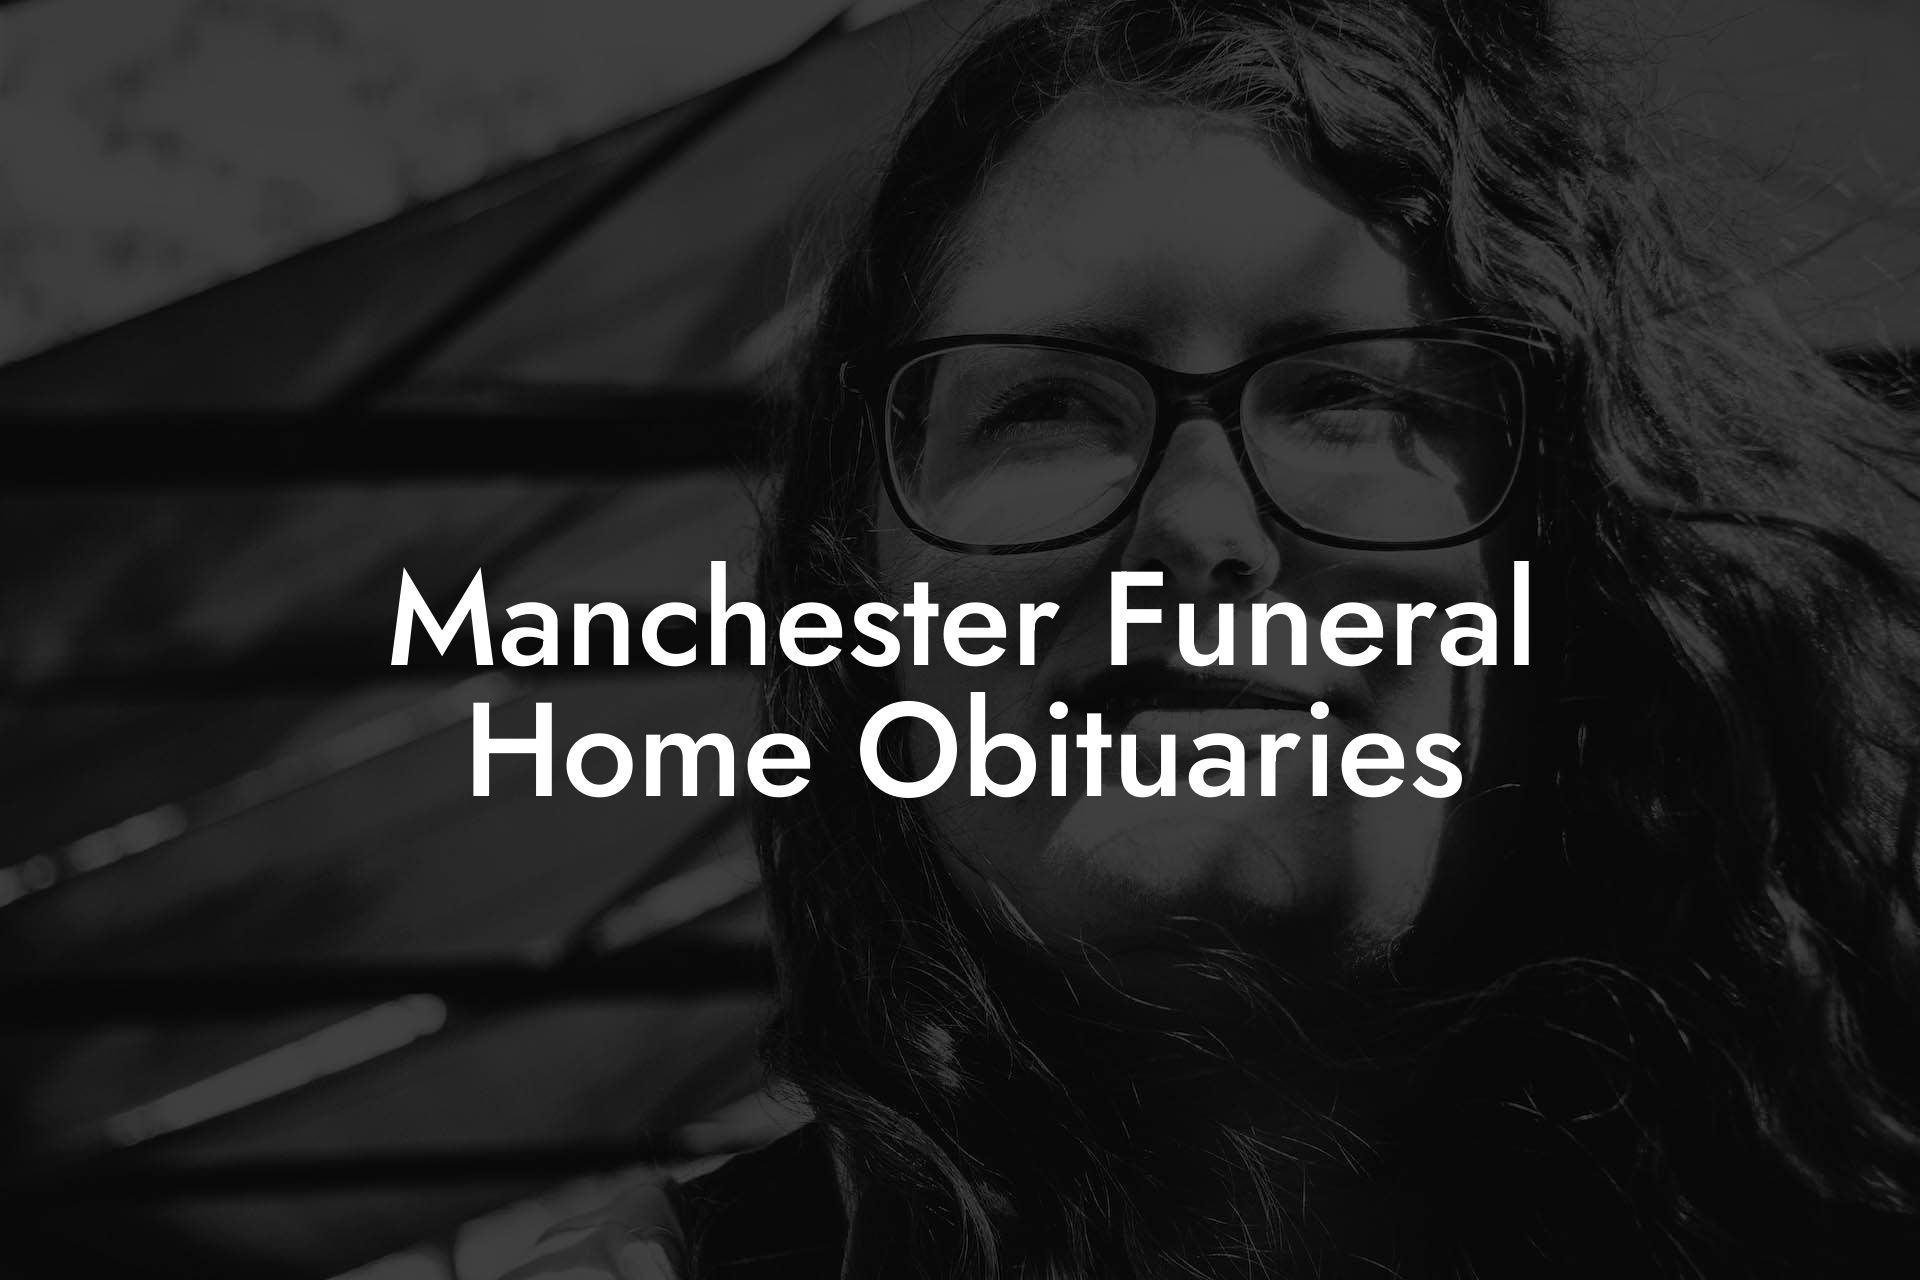 Manchester Funeral Home Obituaries